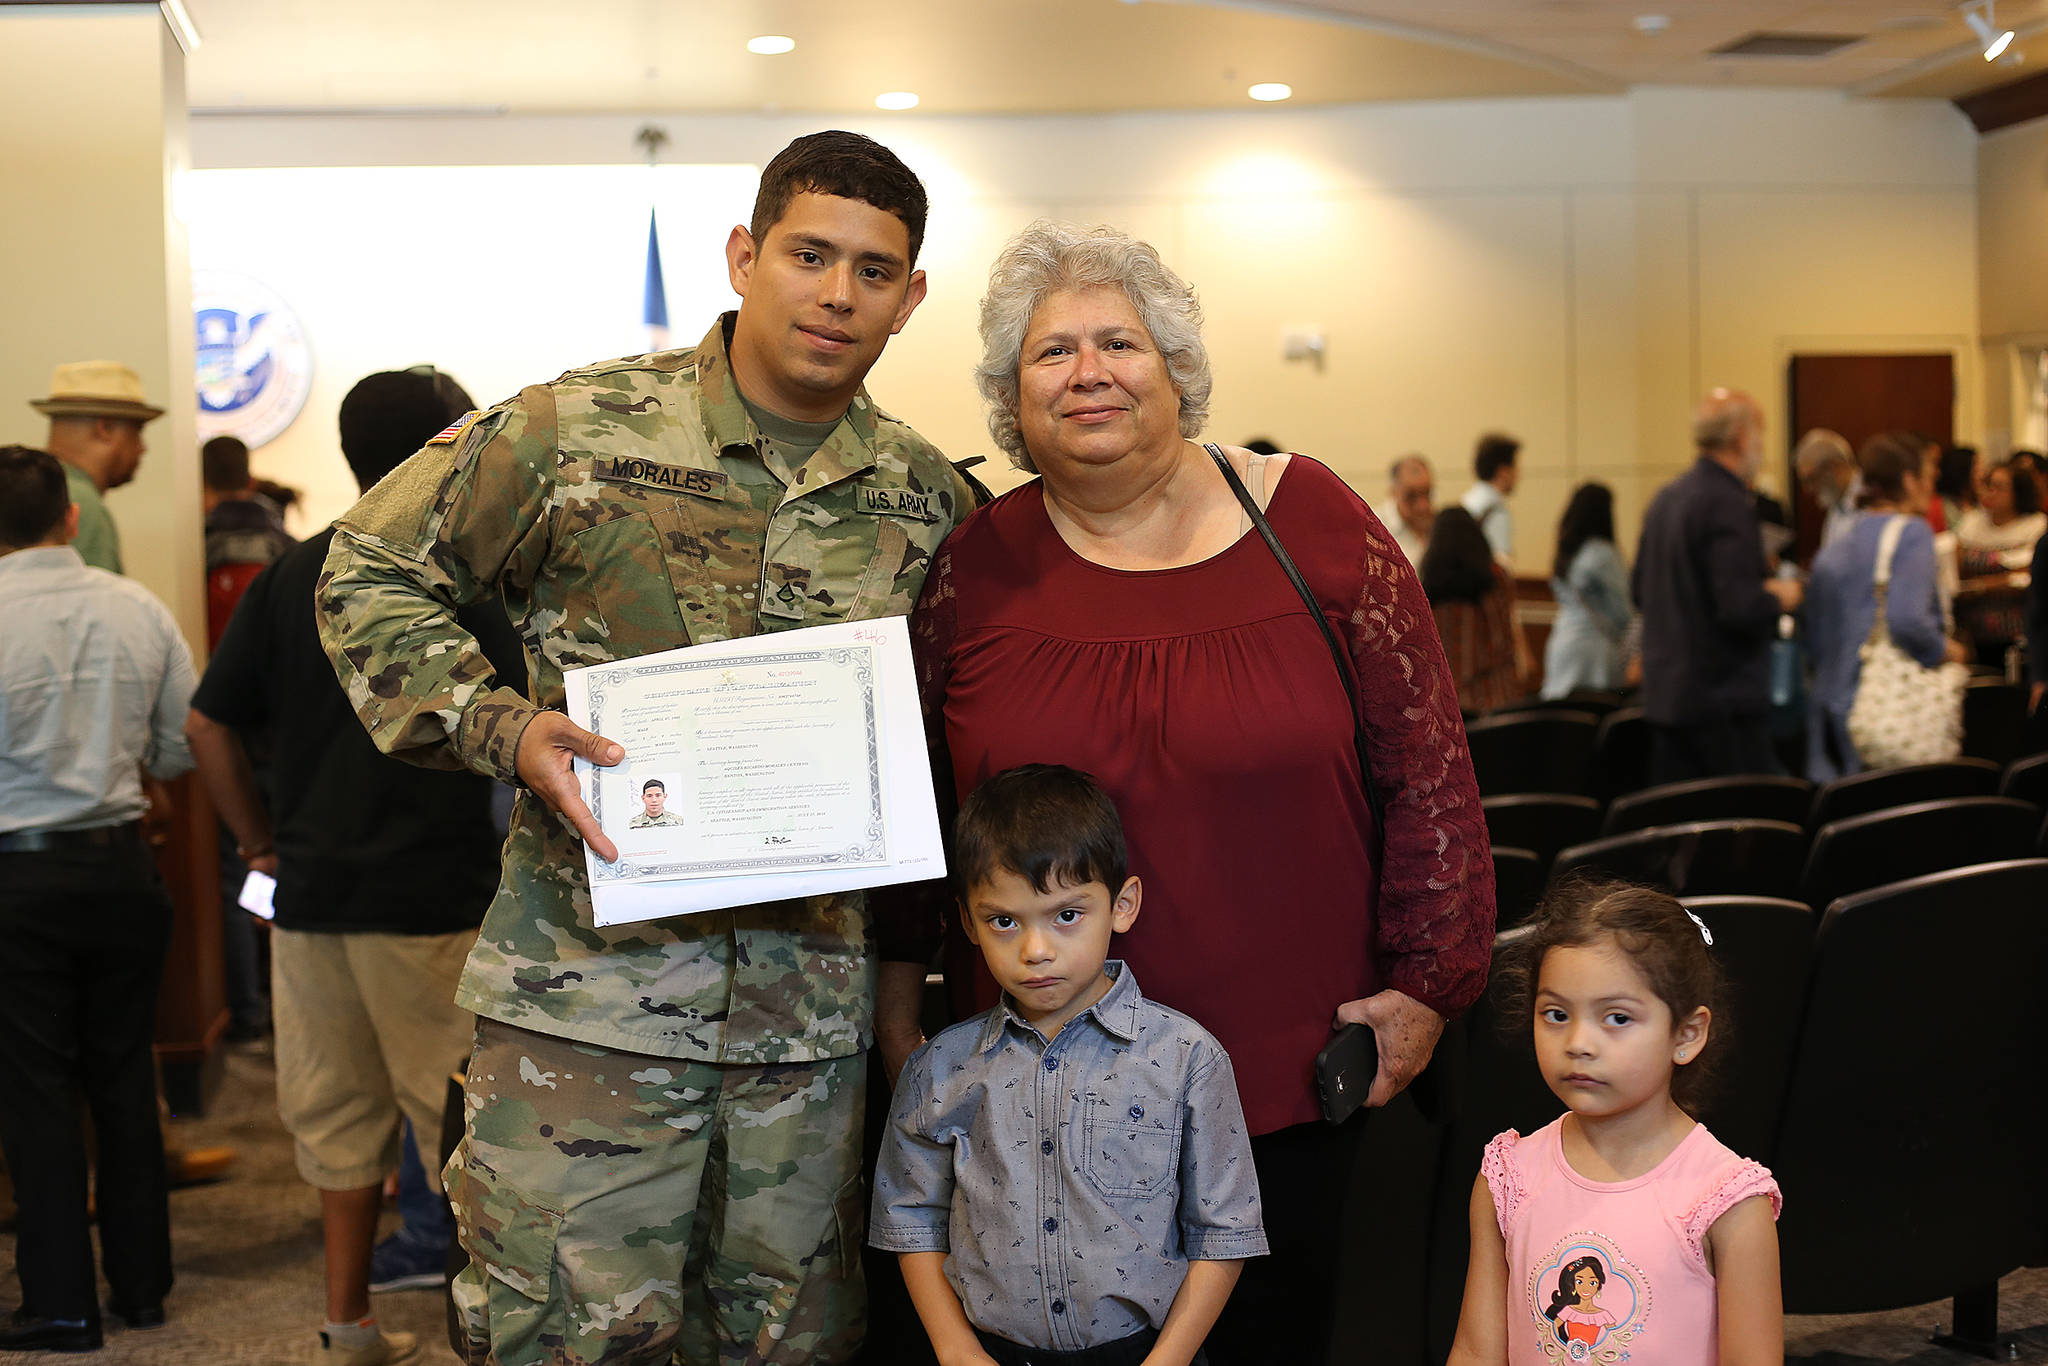 Pvt. 1st Class Aquiles R. Morales Centeno of Headquarters and Headquarters Company, 3rd Battalion, 161st Infantry Regiment, 81st Stryker Brigade Combat Team, poses for a photo with his mother, Elena, nephew, Joshua, and niece, Nicole after reciting the Naturalization Oath of Allegiance to the United States of America to become a naturalized citizen of the U.S. July 17, 2018 in Tukwila. Pfc. Morales is a native of Nicaragua but joined the Washington National Guard with the goal of earning his college degree. COURTESY PHOTO, U.S. Army National Guard, Sgt. 1st Class Jason Kriess.